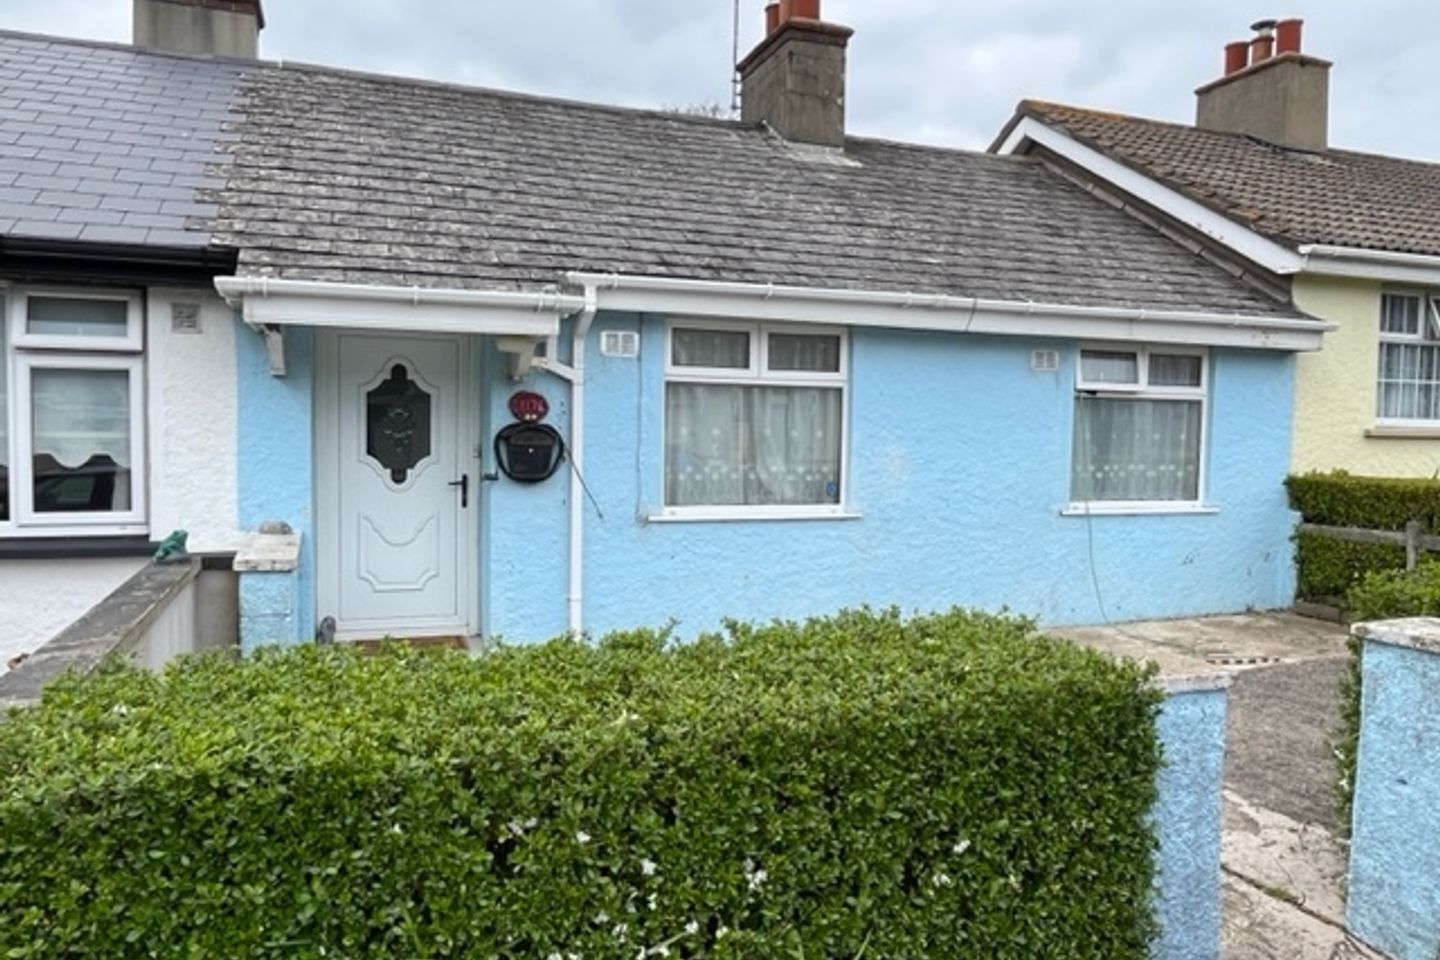 1174 Colville Street, Rosslare Harbour, Co. Wexford, Y35C5Y6